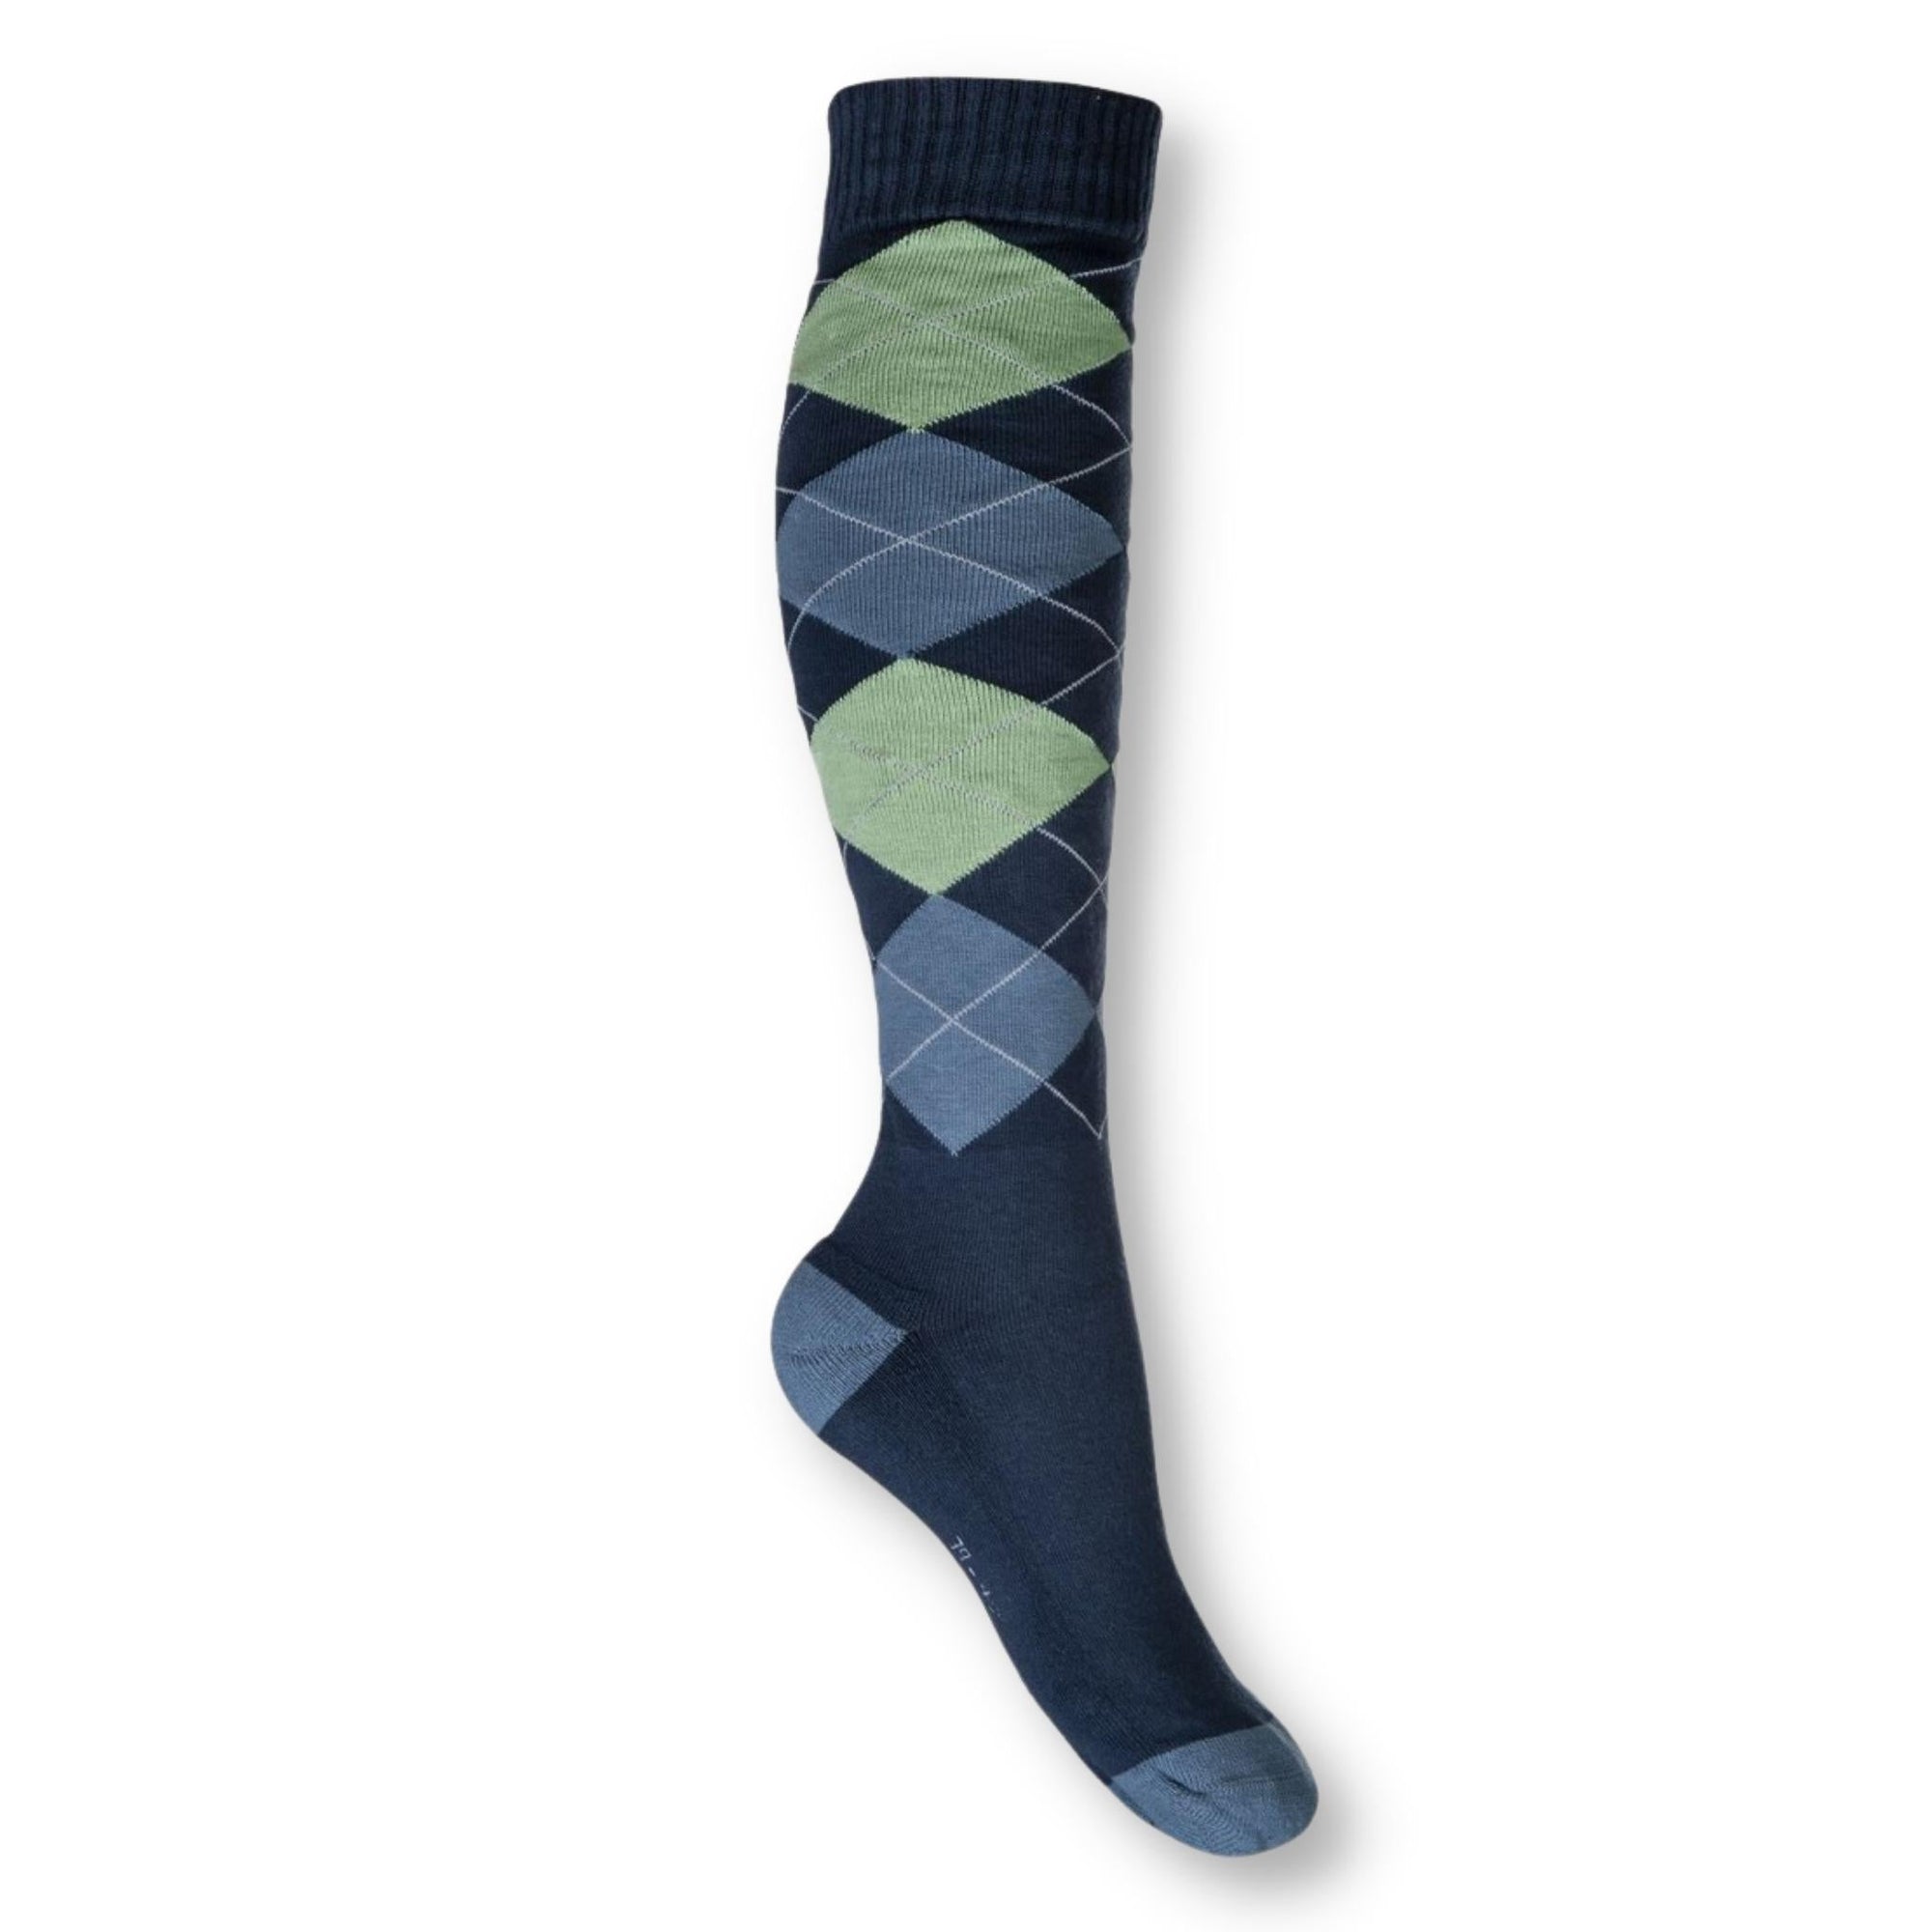 Navy, green and blue checked socks.